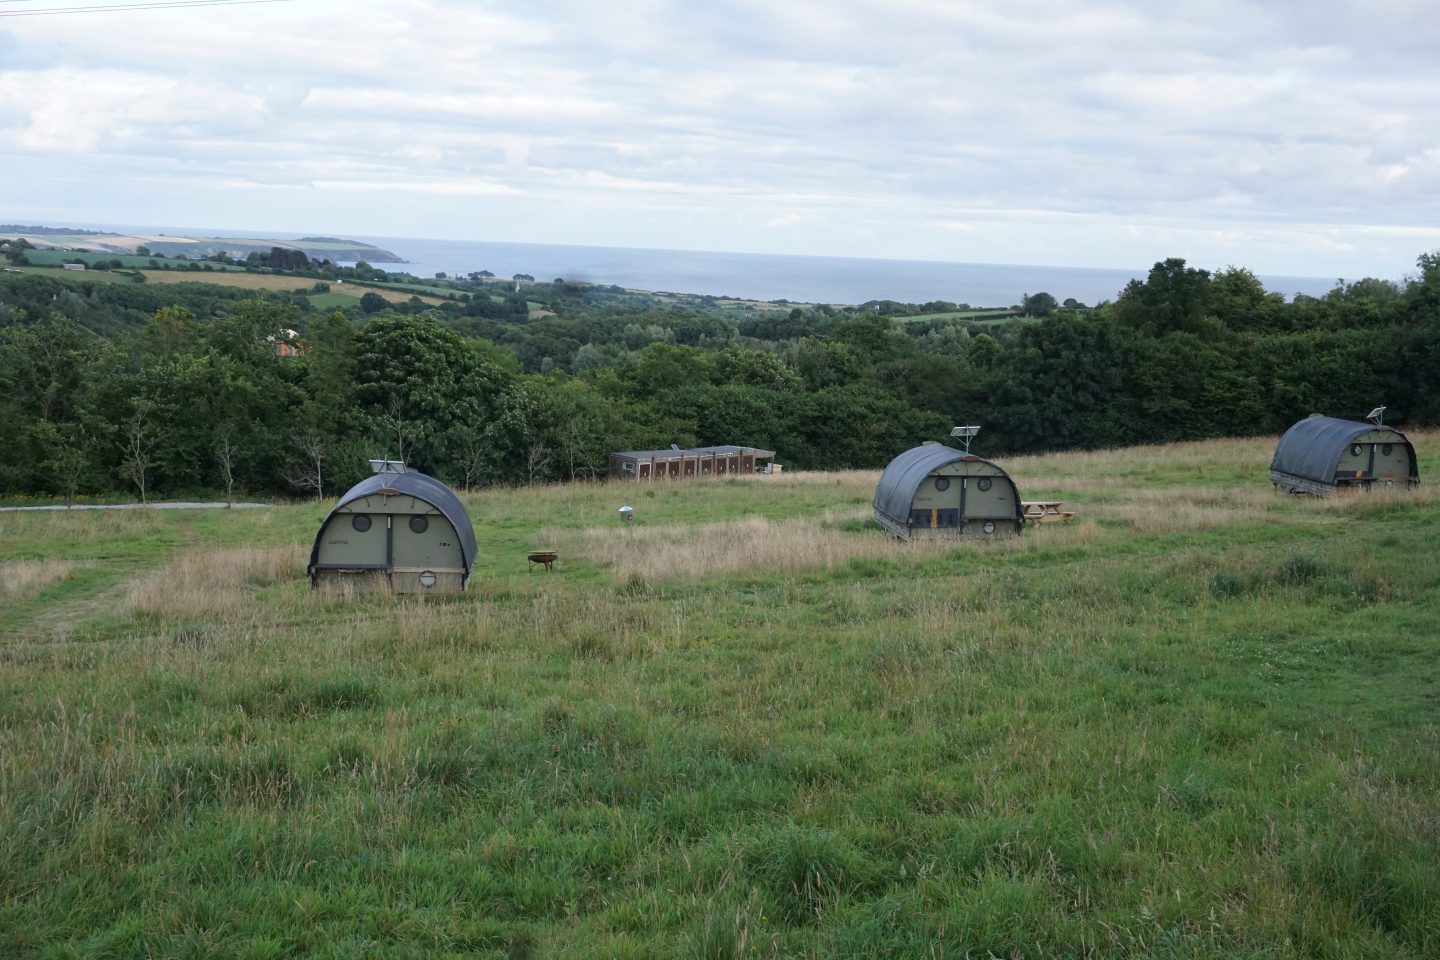 View of Landpods at the YHA Eden Project campsite on grass with hedge and sea in background 